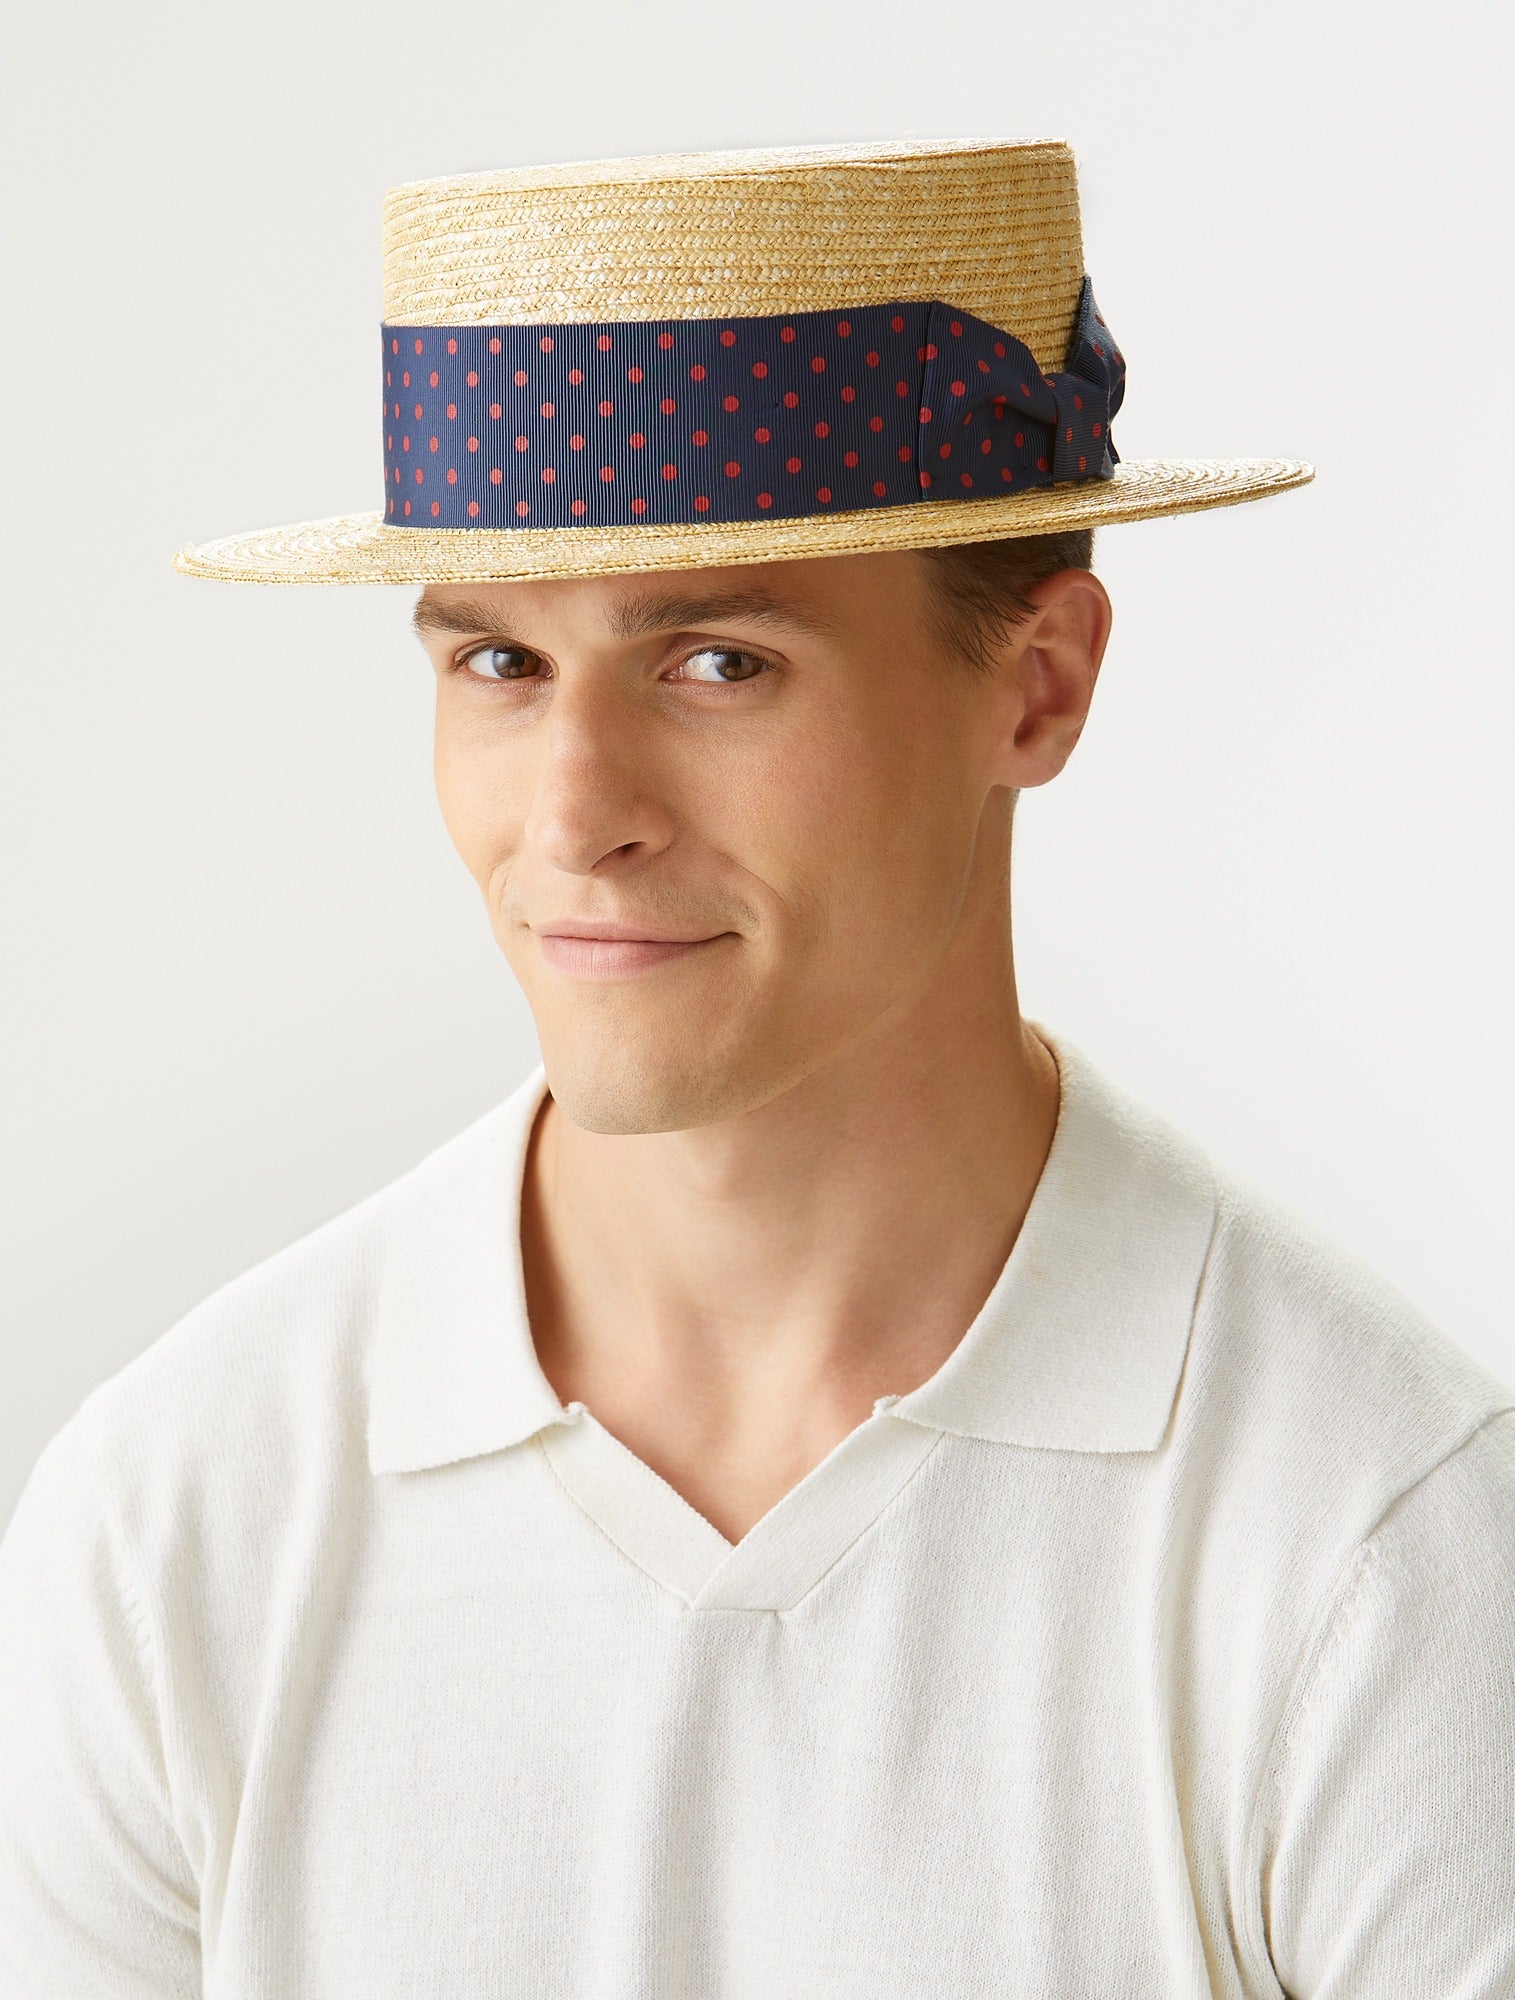 Oxford Boater - Products - Lock & Co. Hatters London UK